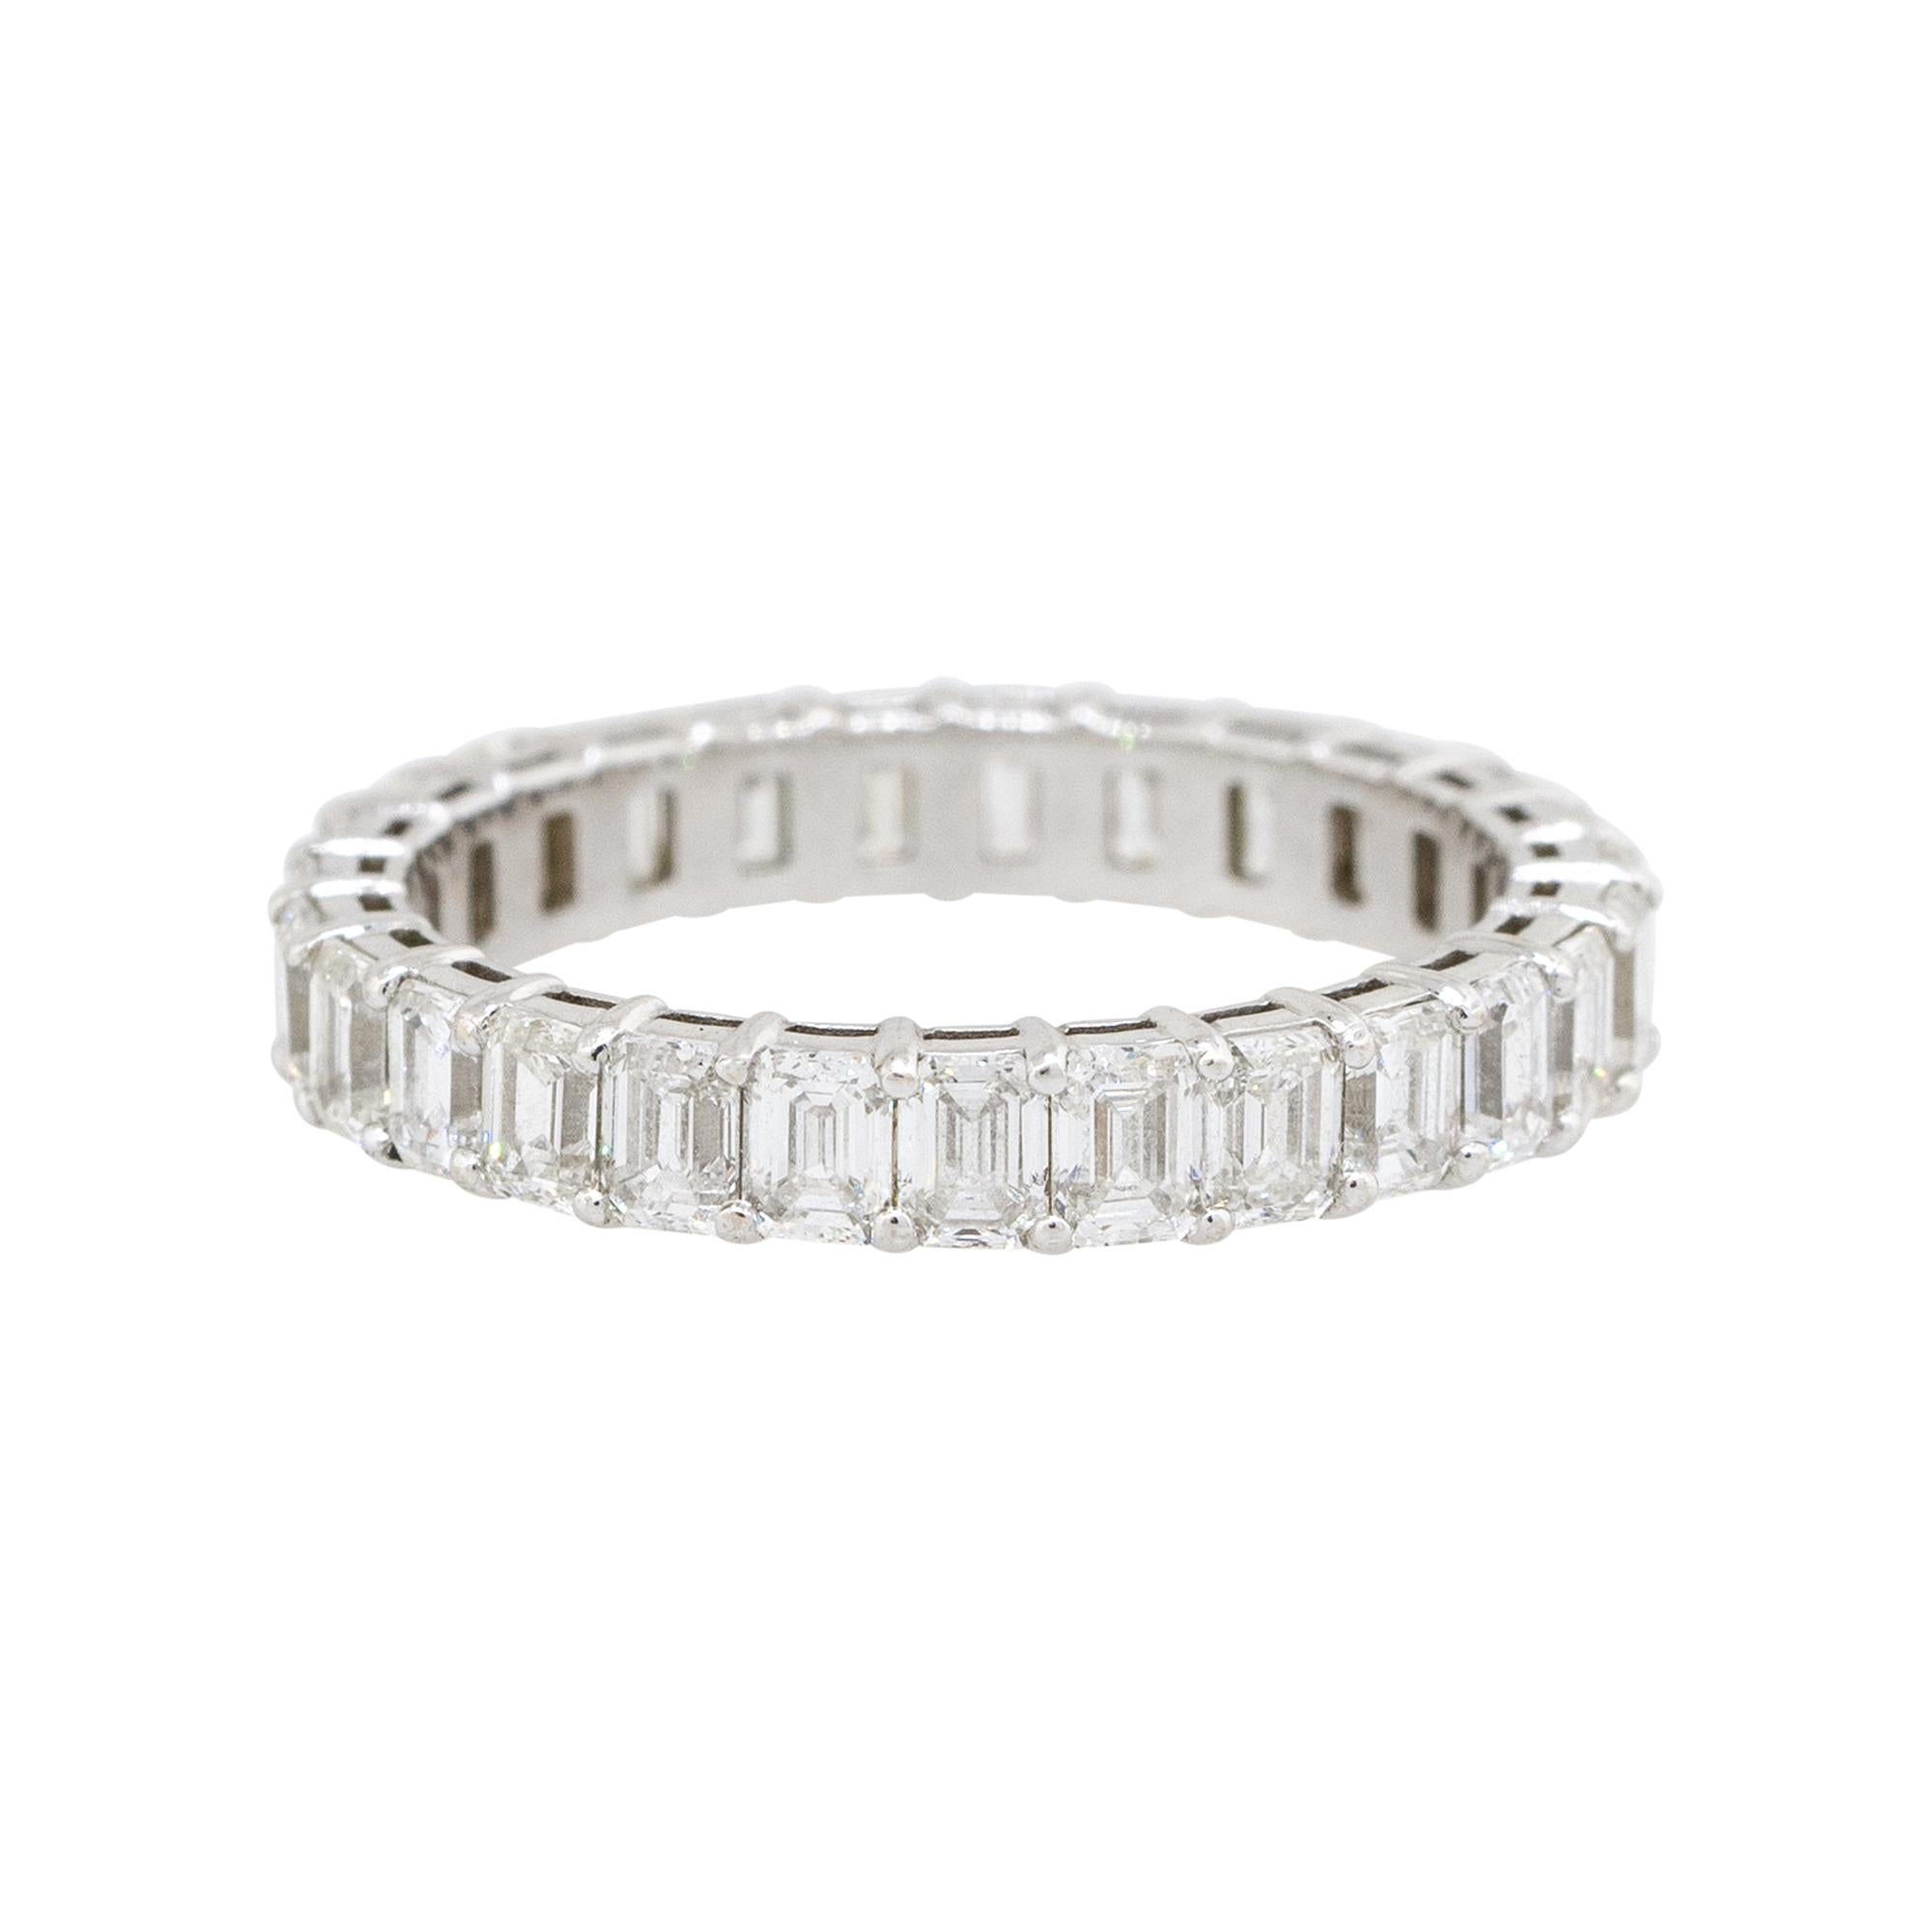 Material: 14k white gold
Diamond Details: Approx. 2.60ctw of emerald cut Diamonds. Diamonds are G/H in color and VS in clarity
Total Weight: 1.8g (1.2dwt)
Size: 6.25 
Dimensions: 21mm x 3.40mm x 21mm
Additional Details: This item comes with a